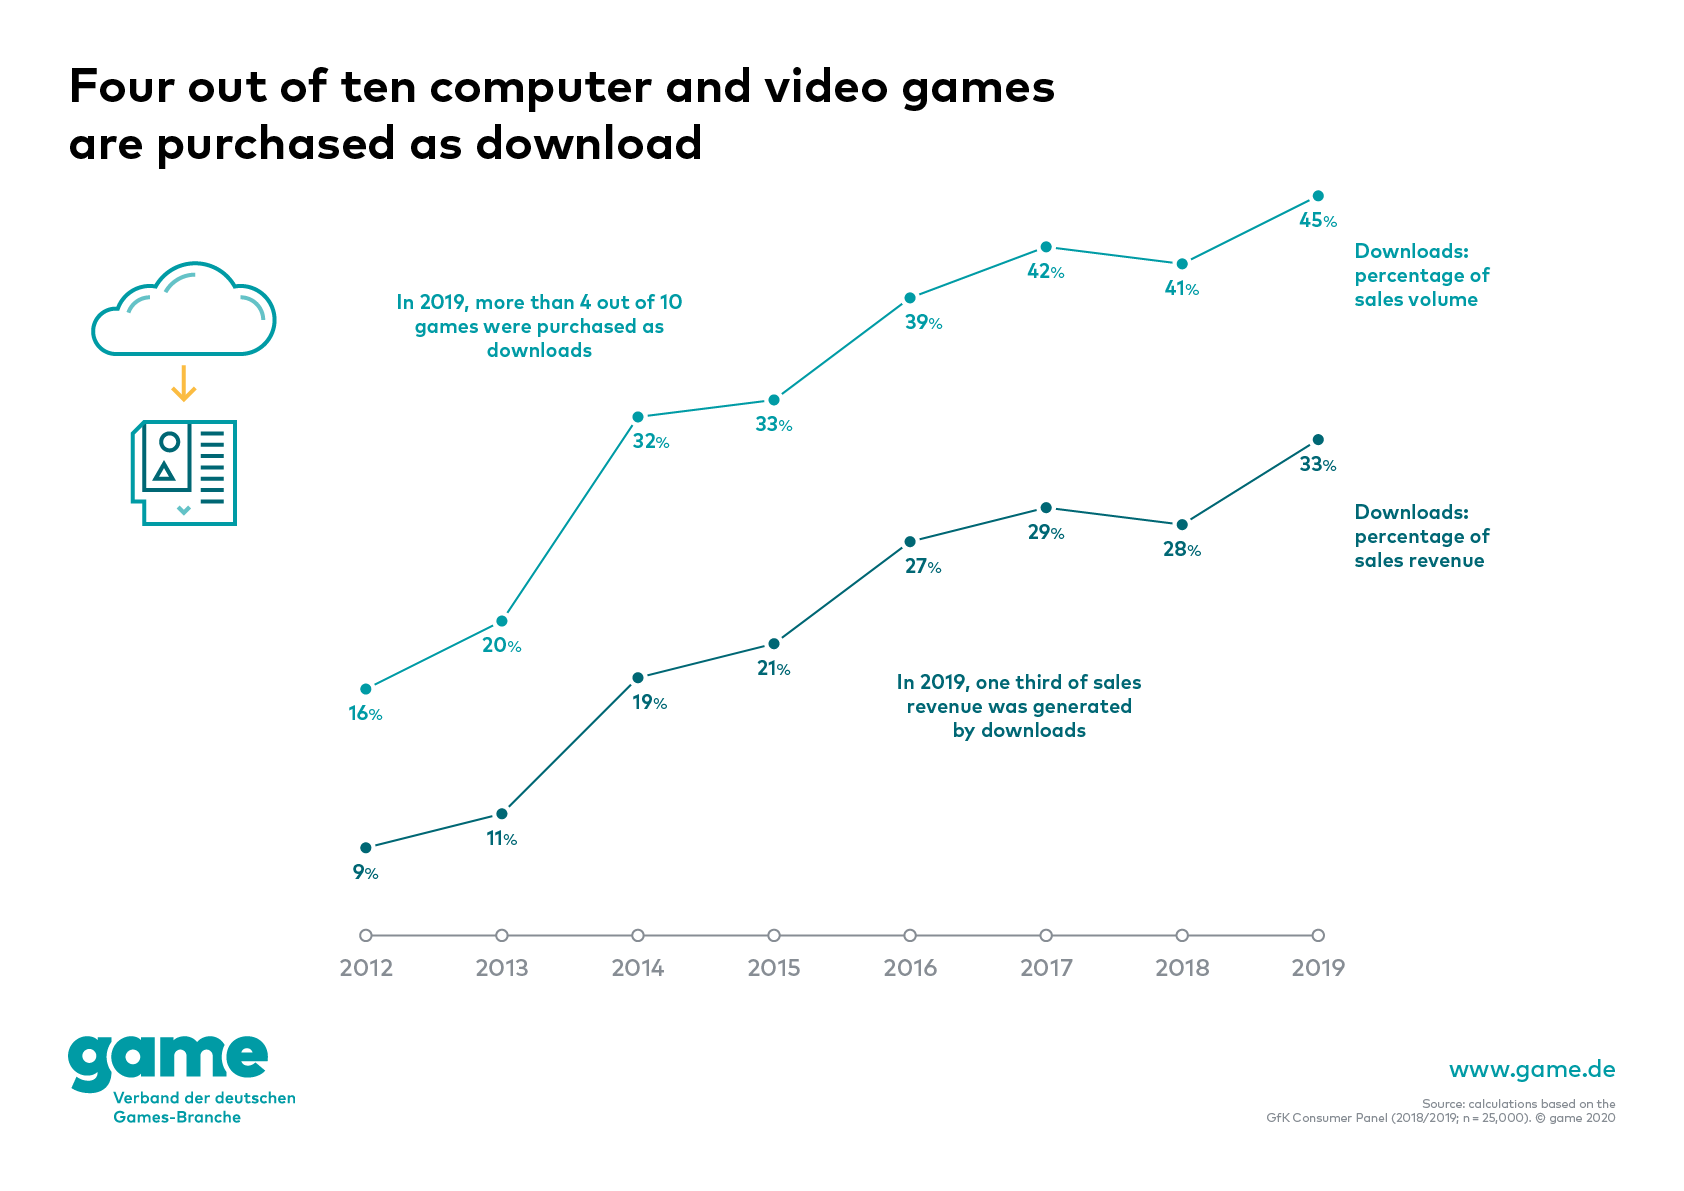 Four out of ten computer and video games are purchased as download in 2019